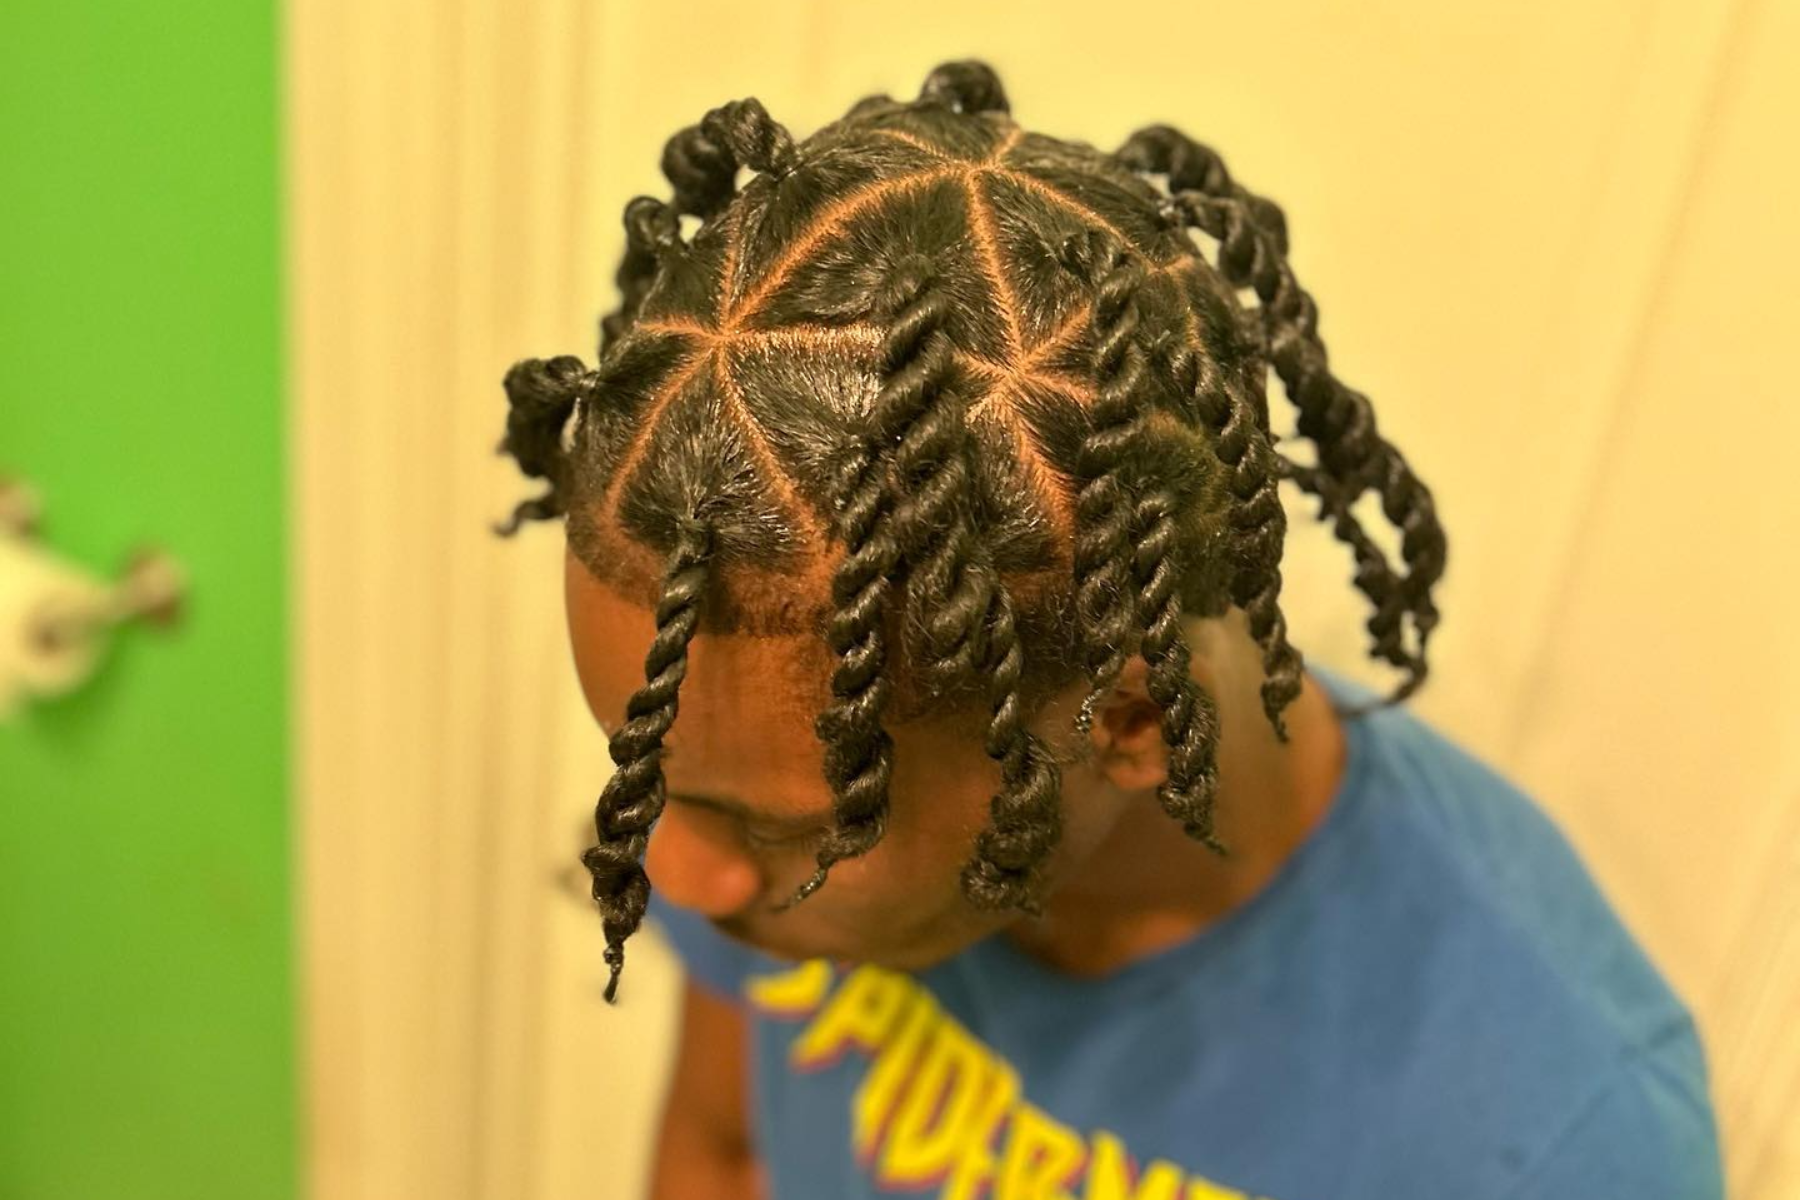 Best Men's Afro Hair Salons London for Two-Strand Twists Braids - FroHub